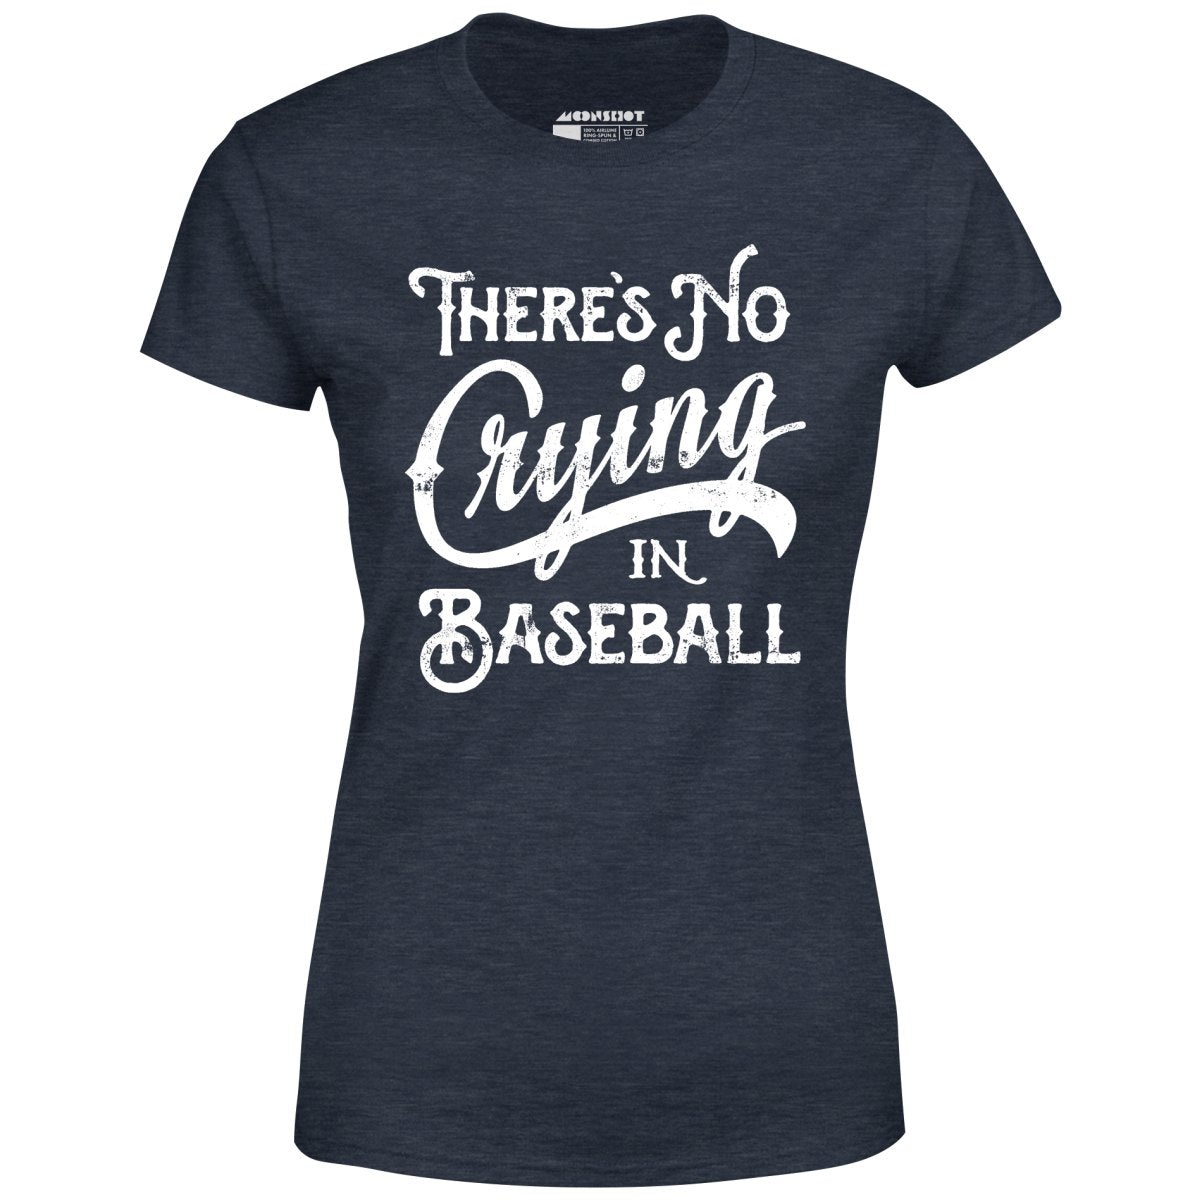 There's No Crying in Baseball - Women's T-Shirt